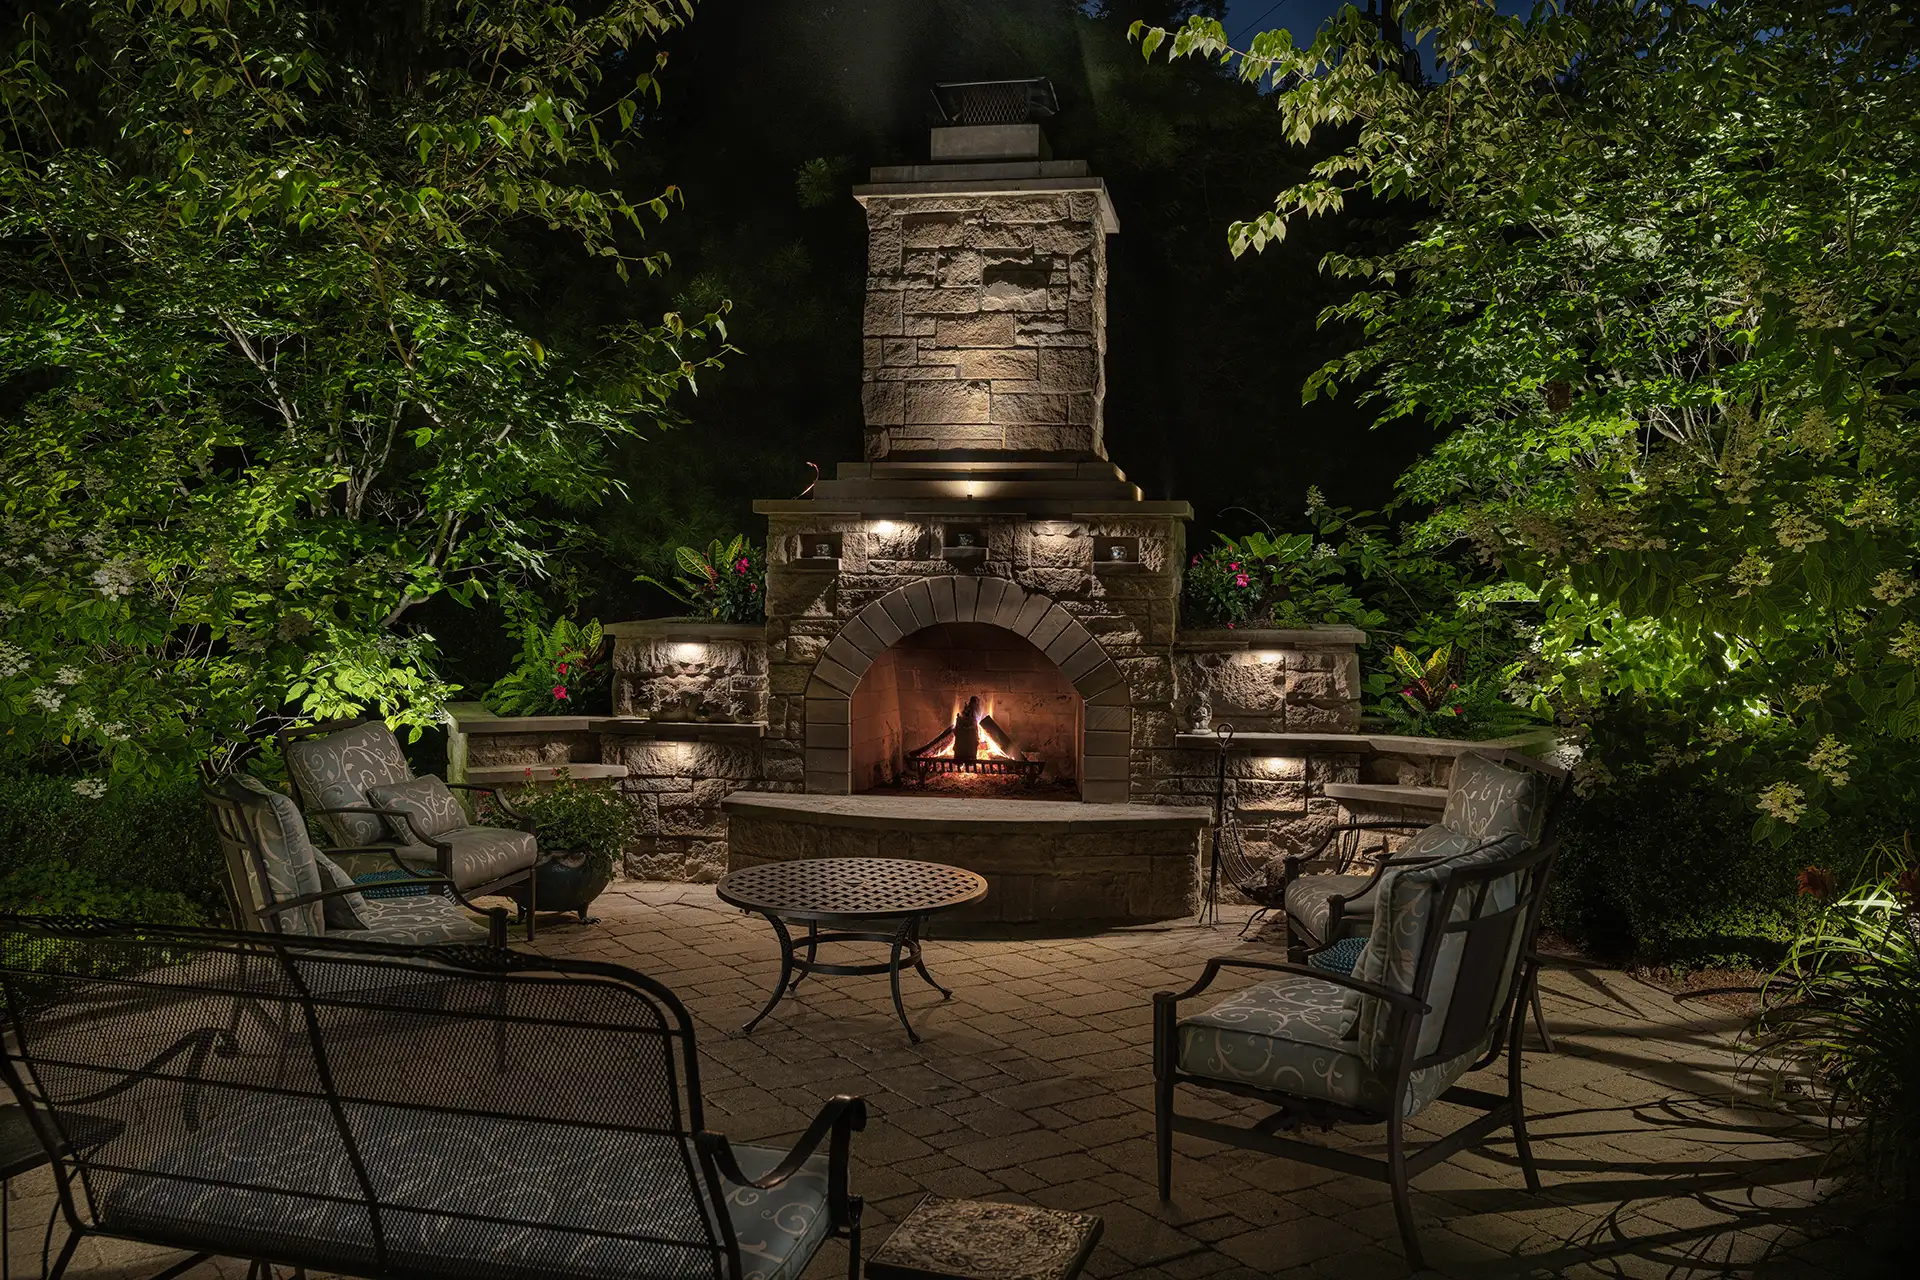 Fisher residence image 11 fireplace and seating area Lighthouse Outdoor Lighting and Audio Indianapolis IN Indiana